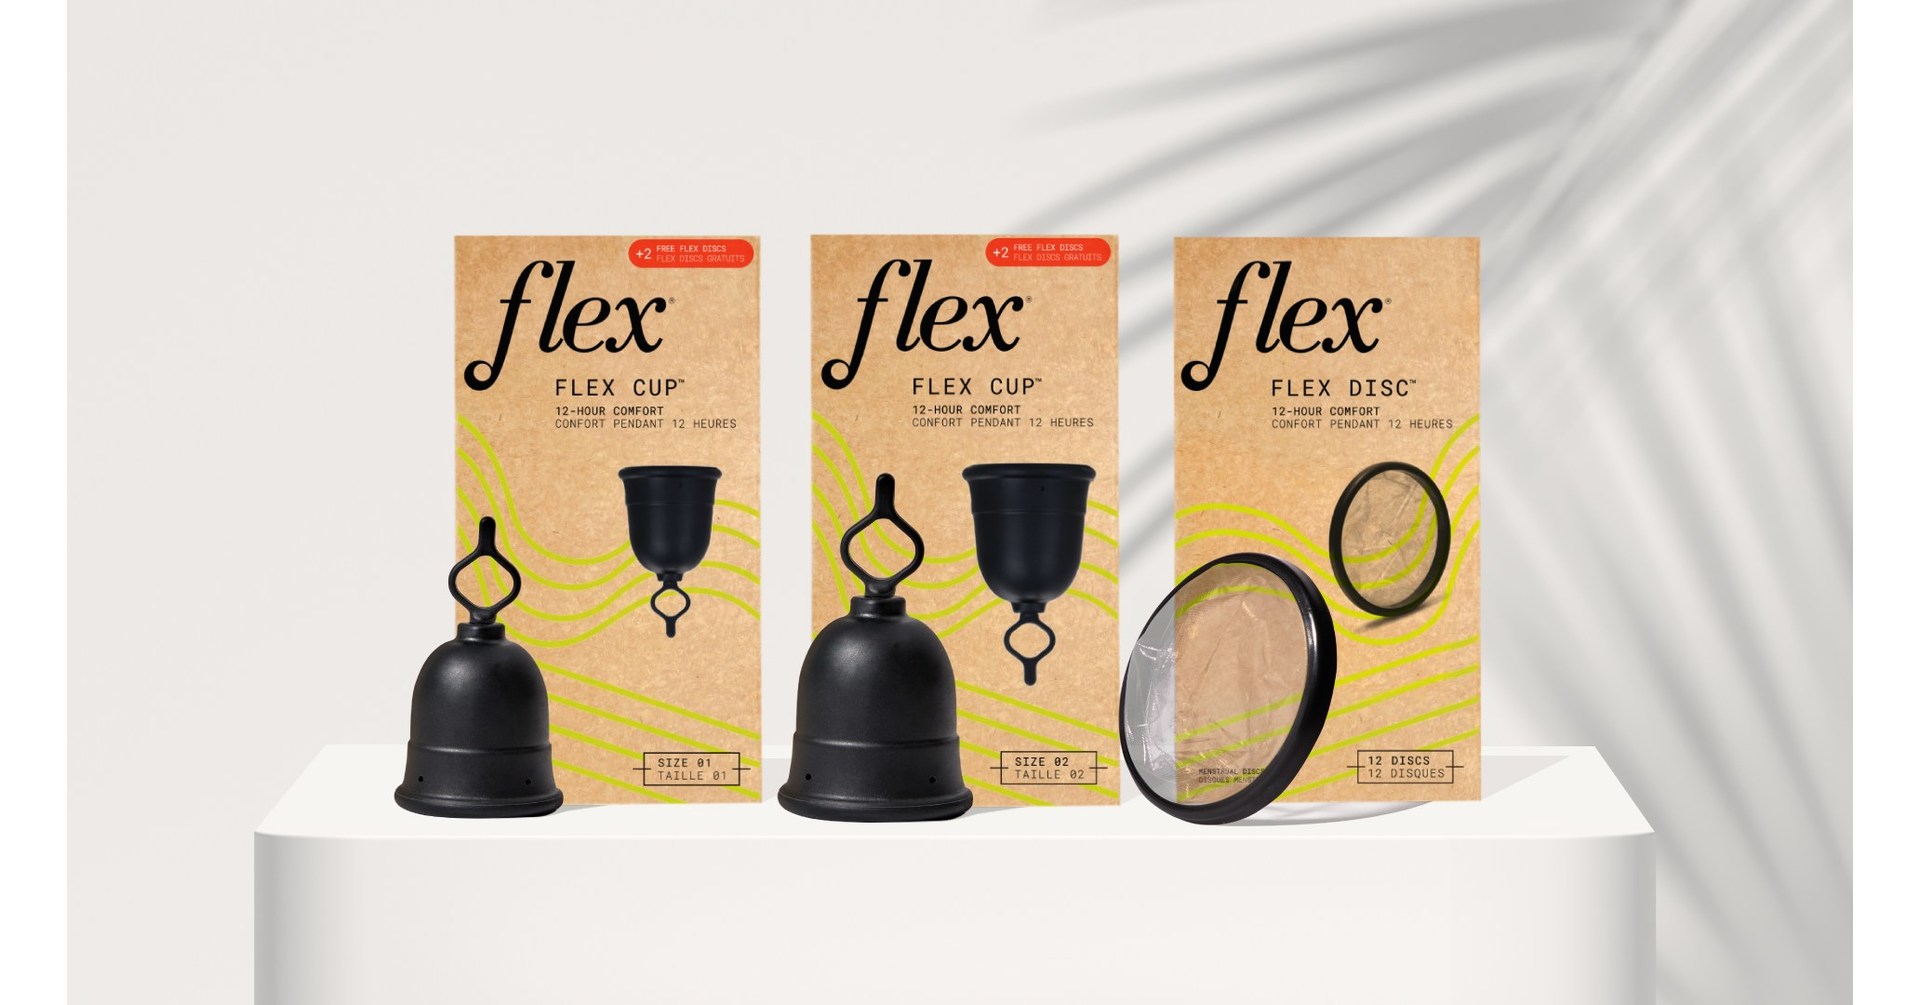 The Flex Company Launches Innovative & Sustainable Period Products